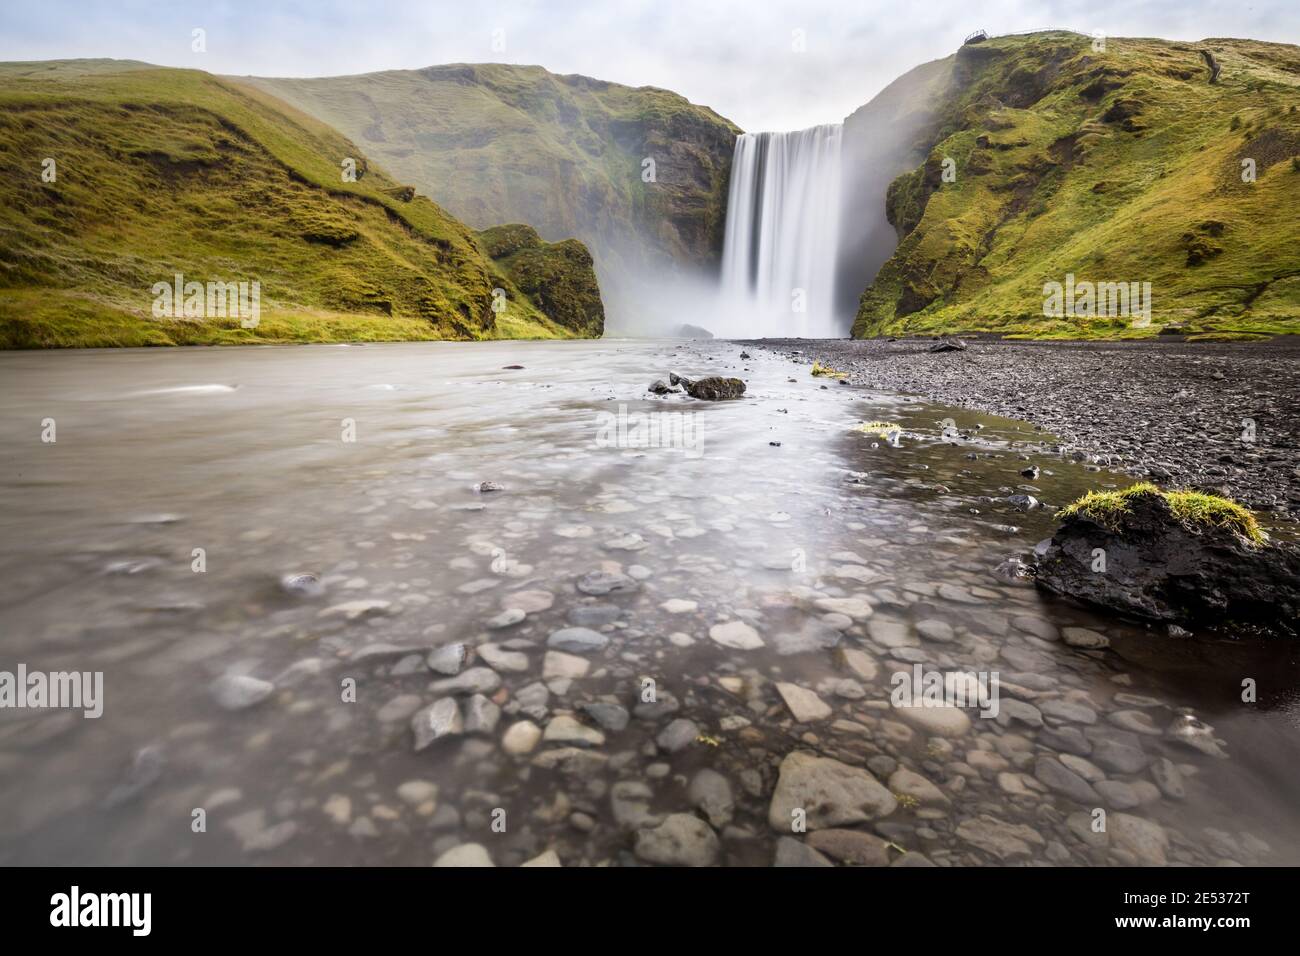 Iconic icelandic landscape with a stream flowing over pebbles in foreground and the Skogafoss waterfall, surrounded by green hills, in the background Stock Photo